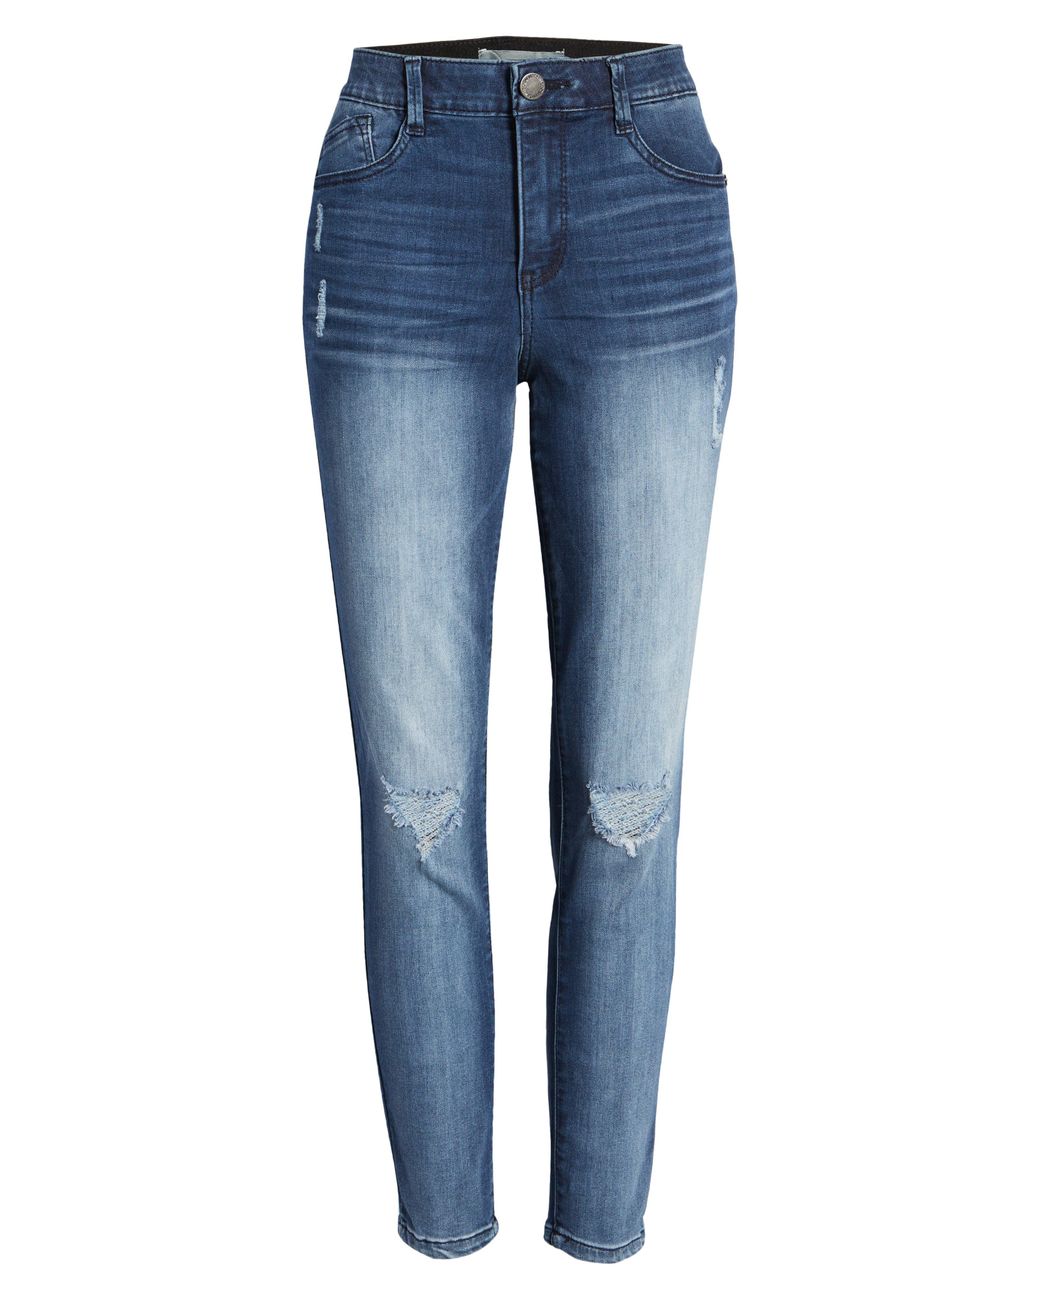 Wit & Wisdom Ripped High Waist Ankle Skinny Jeans in Blue | Lyst